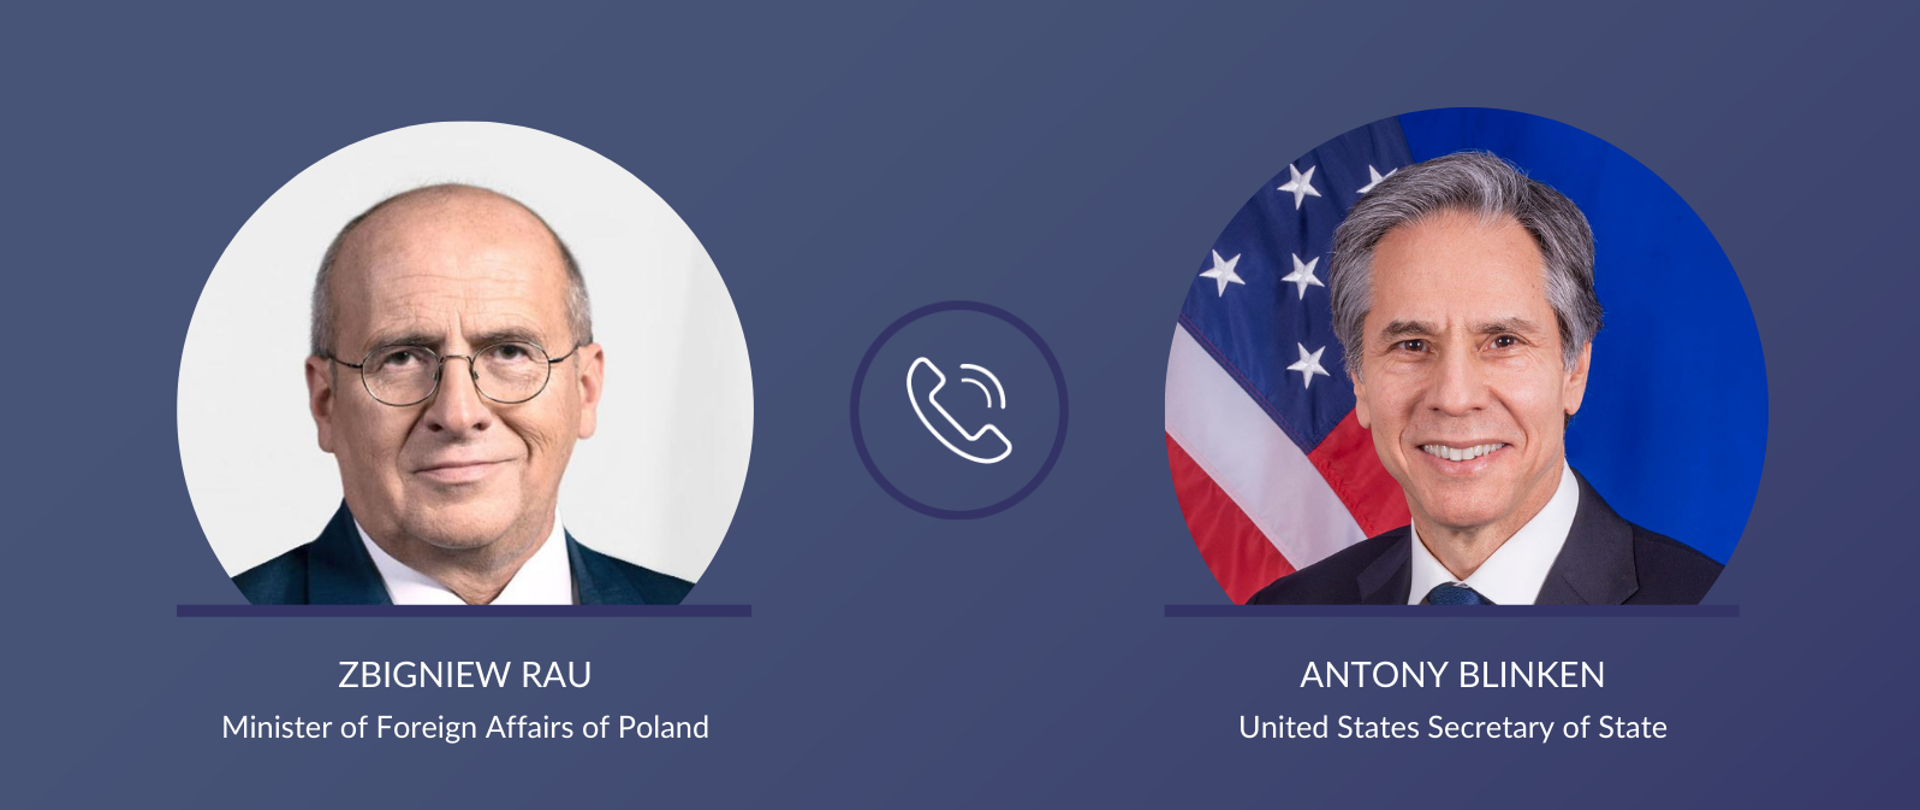 Zbigniew Rau Minister of Foreign Affairs of Poland and Antony Blinken United States Secretary of State